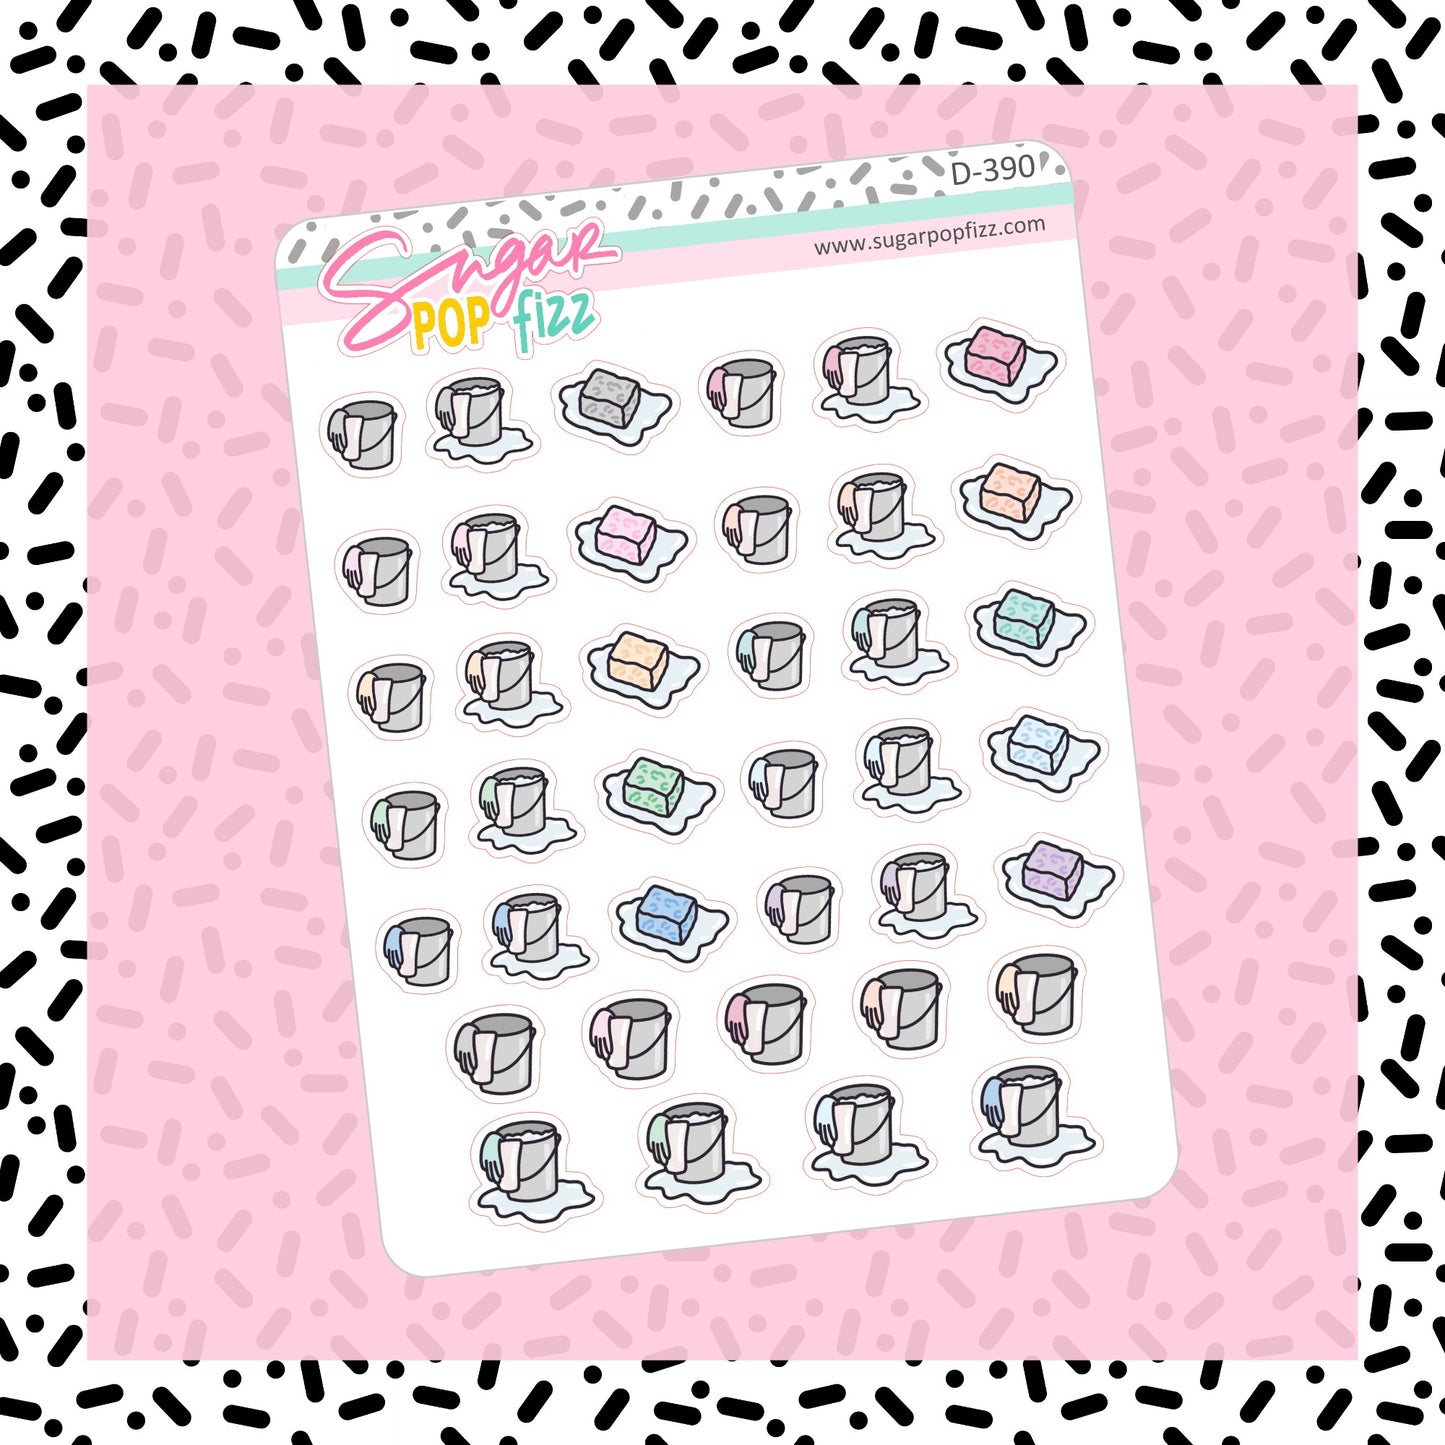 Cleaning Doodle Stickers - D390